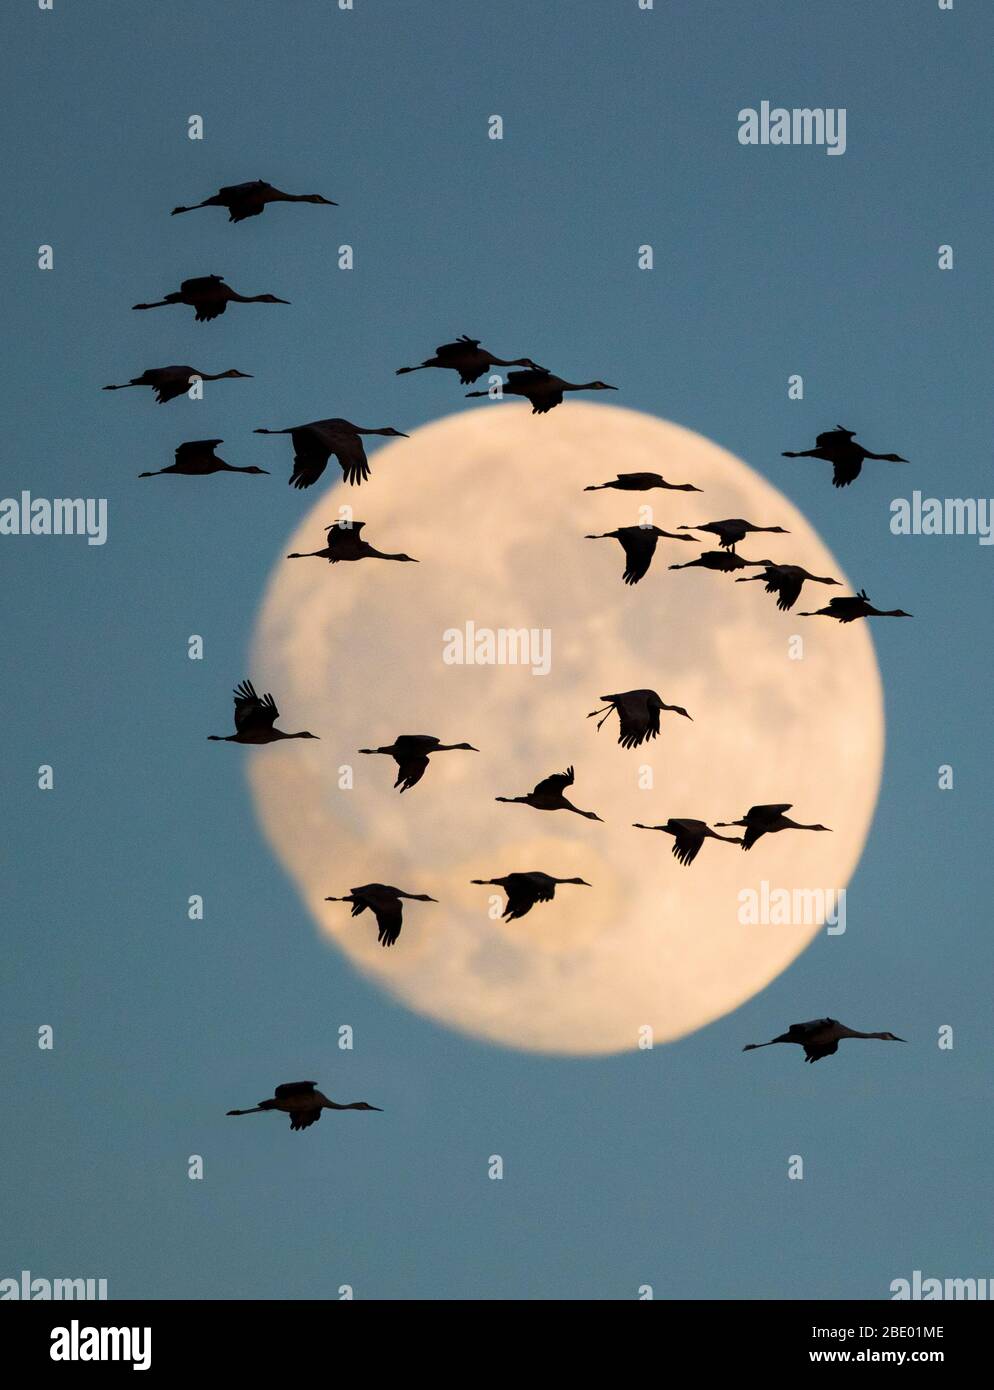 Large group of sandhill cranes (Antigone canadensis) flying against moon, Soccoro, New Mexico, USA Stock Photo